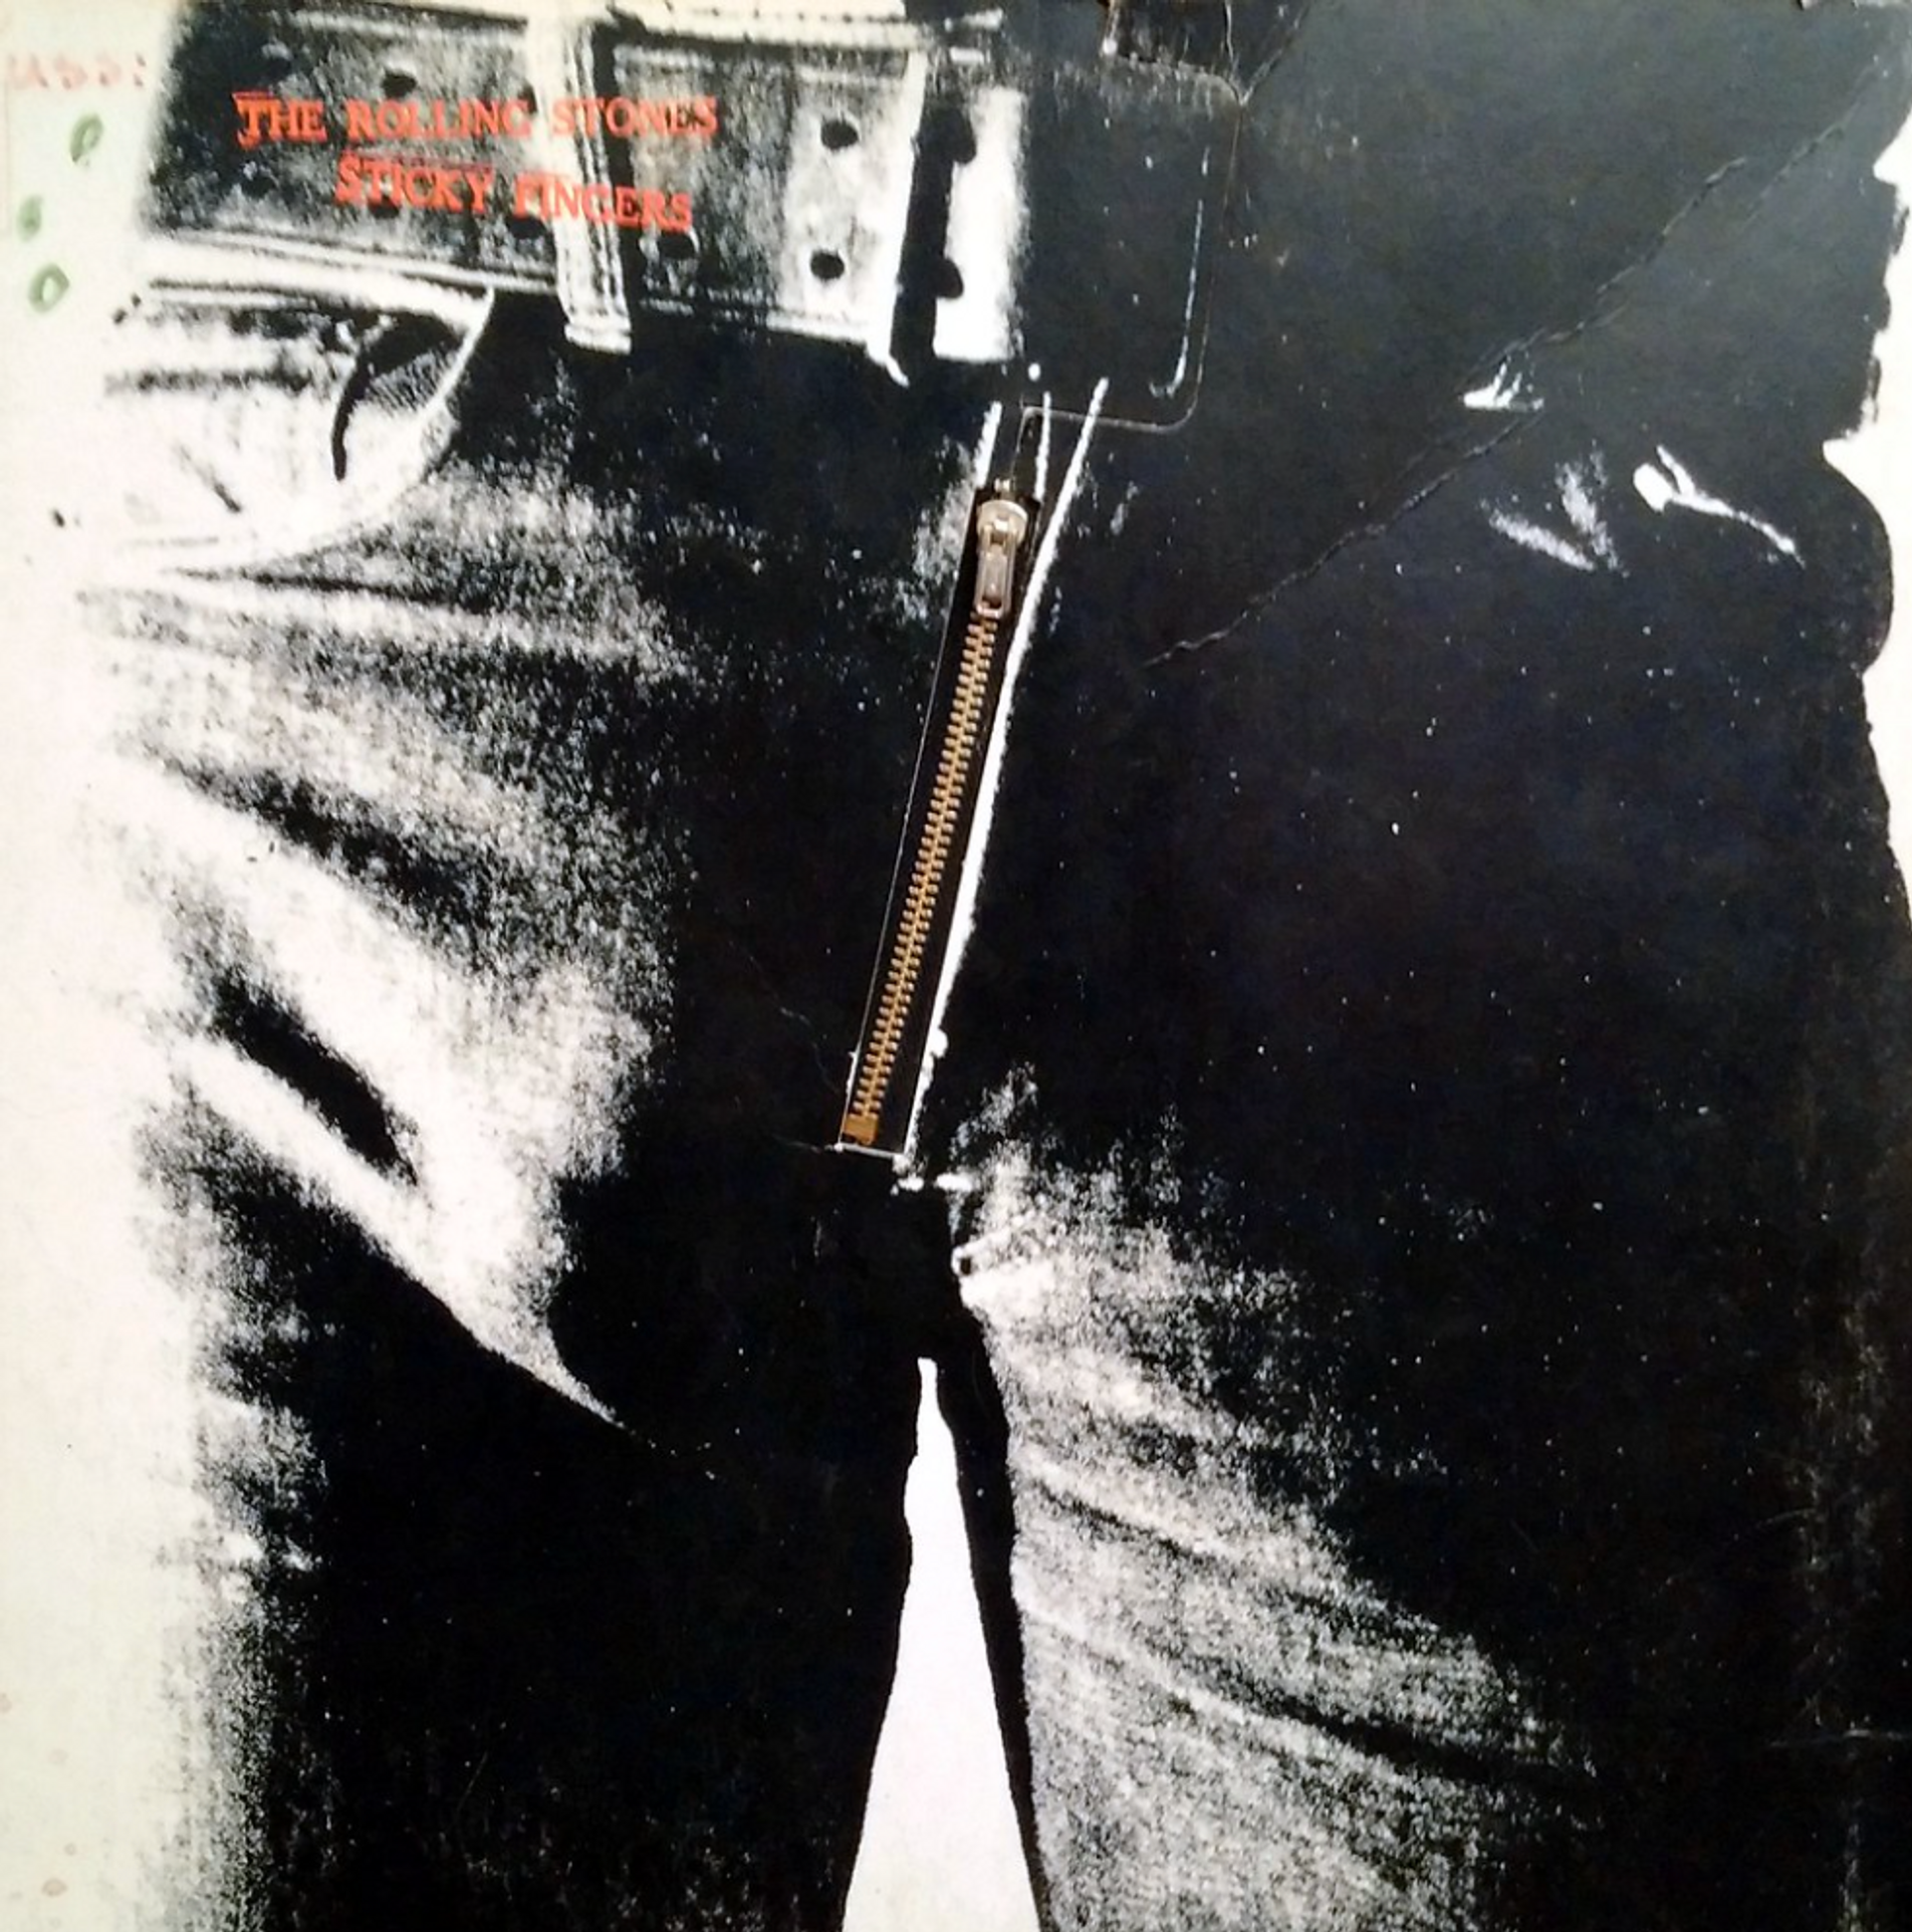 The Rolling Stones' "Sticky Fingers" Album Cover by Andy Warhol - MyArtBroker